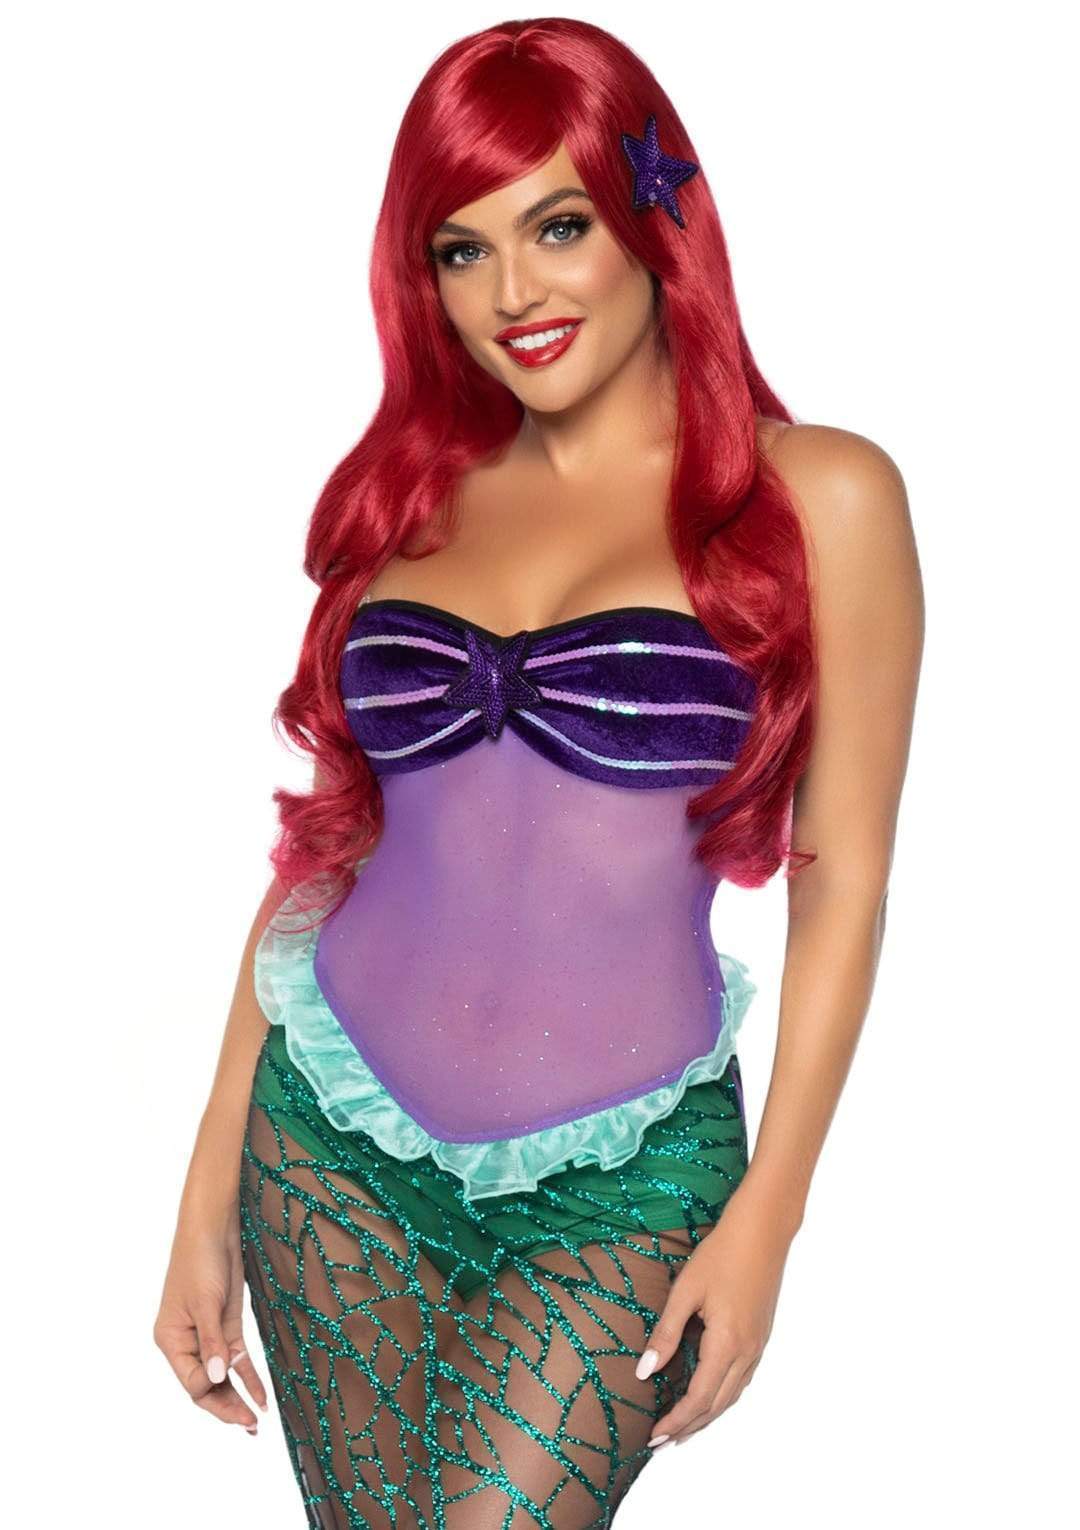 little mermaid outfit